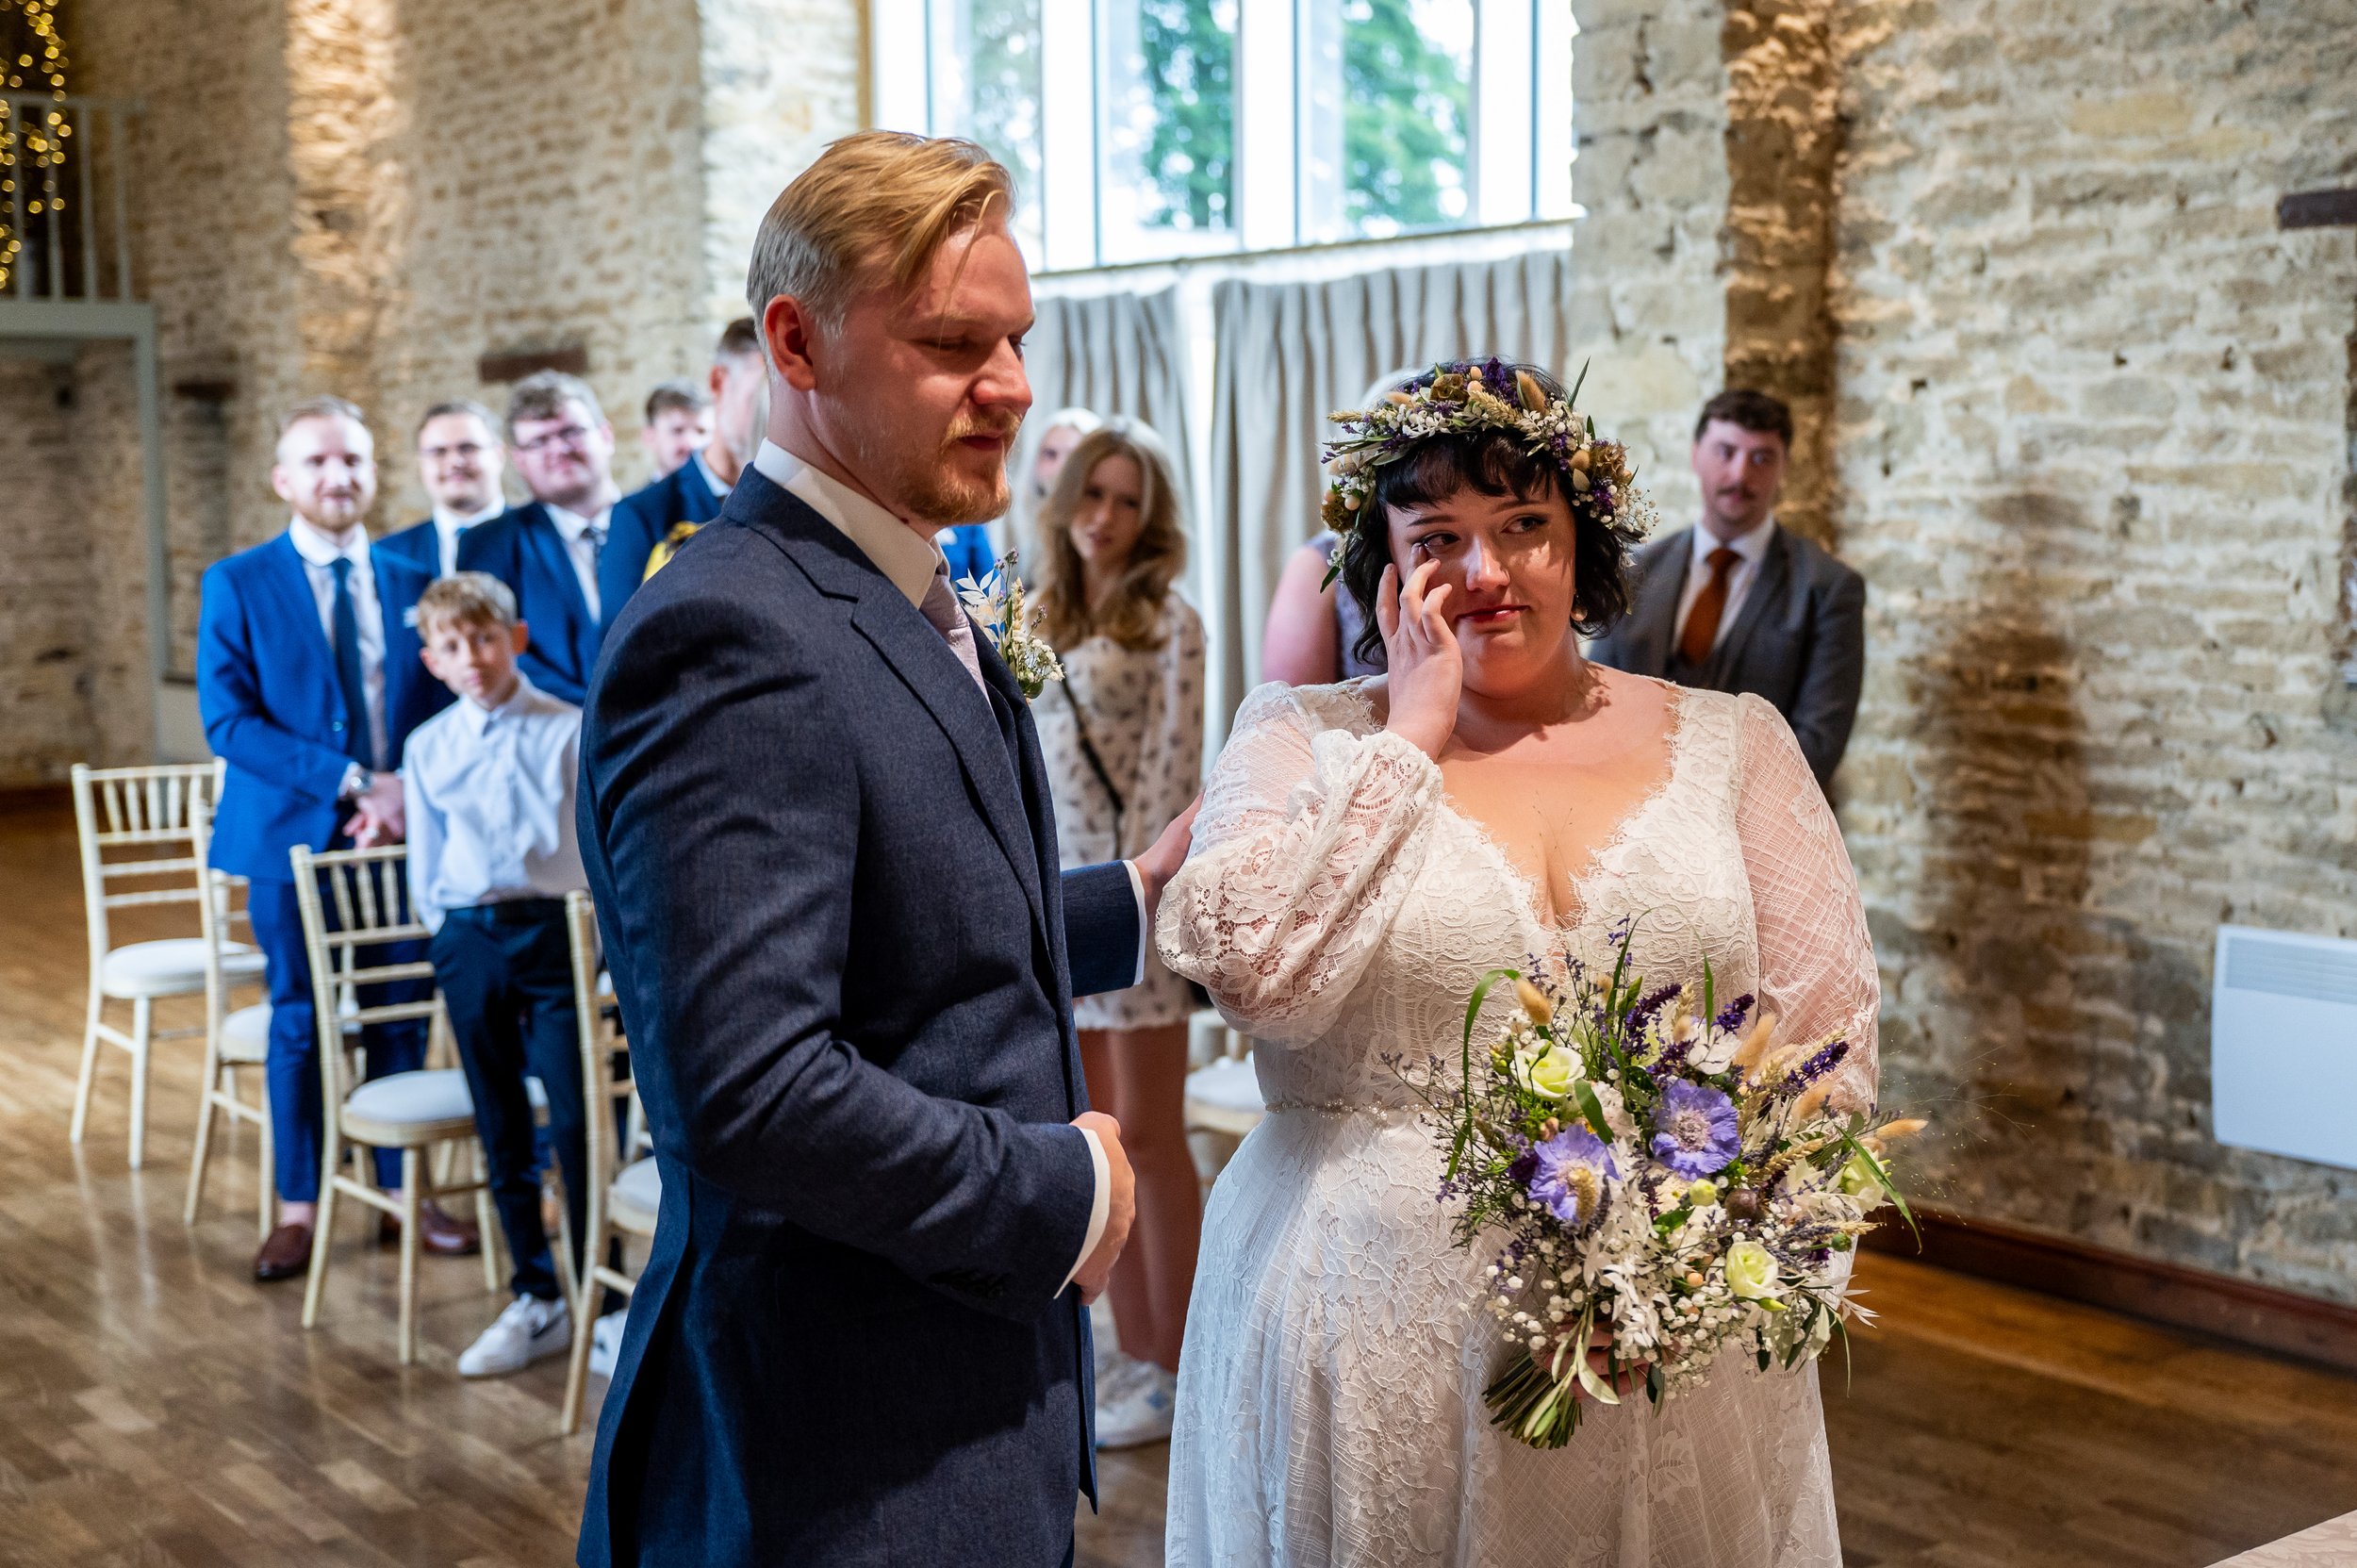 Ceremony at the great barn aynho 